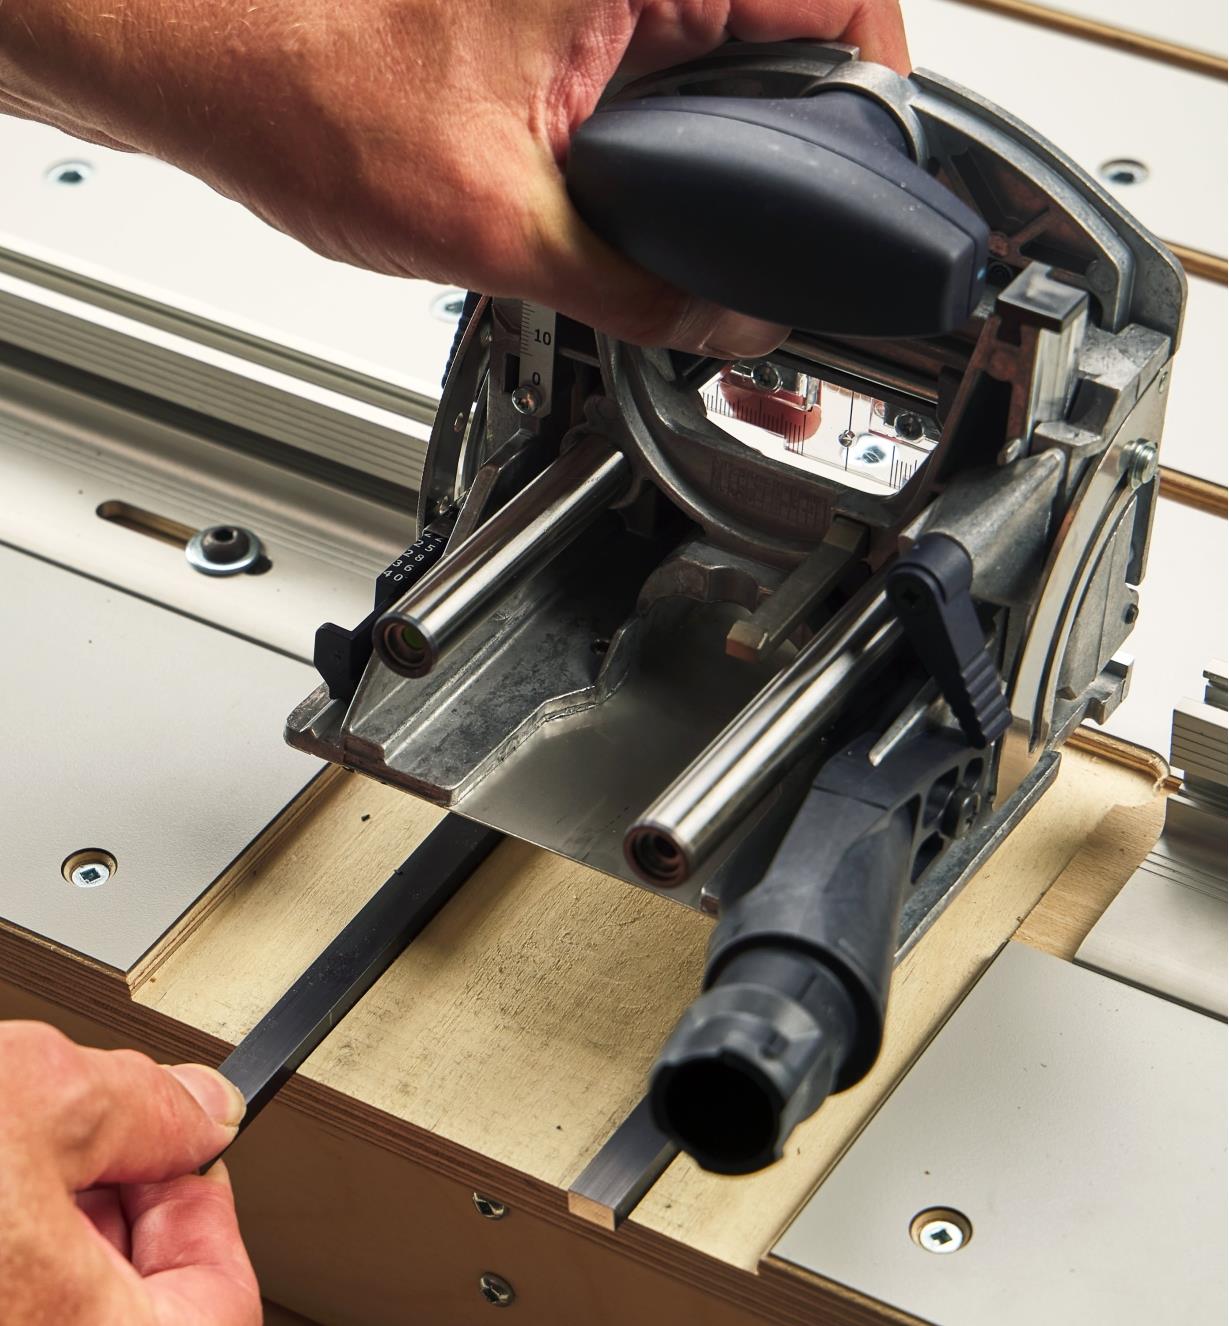 Installing shims in the table slots of a Veritas Domino joinery table to create a vertical offset